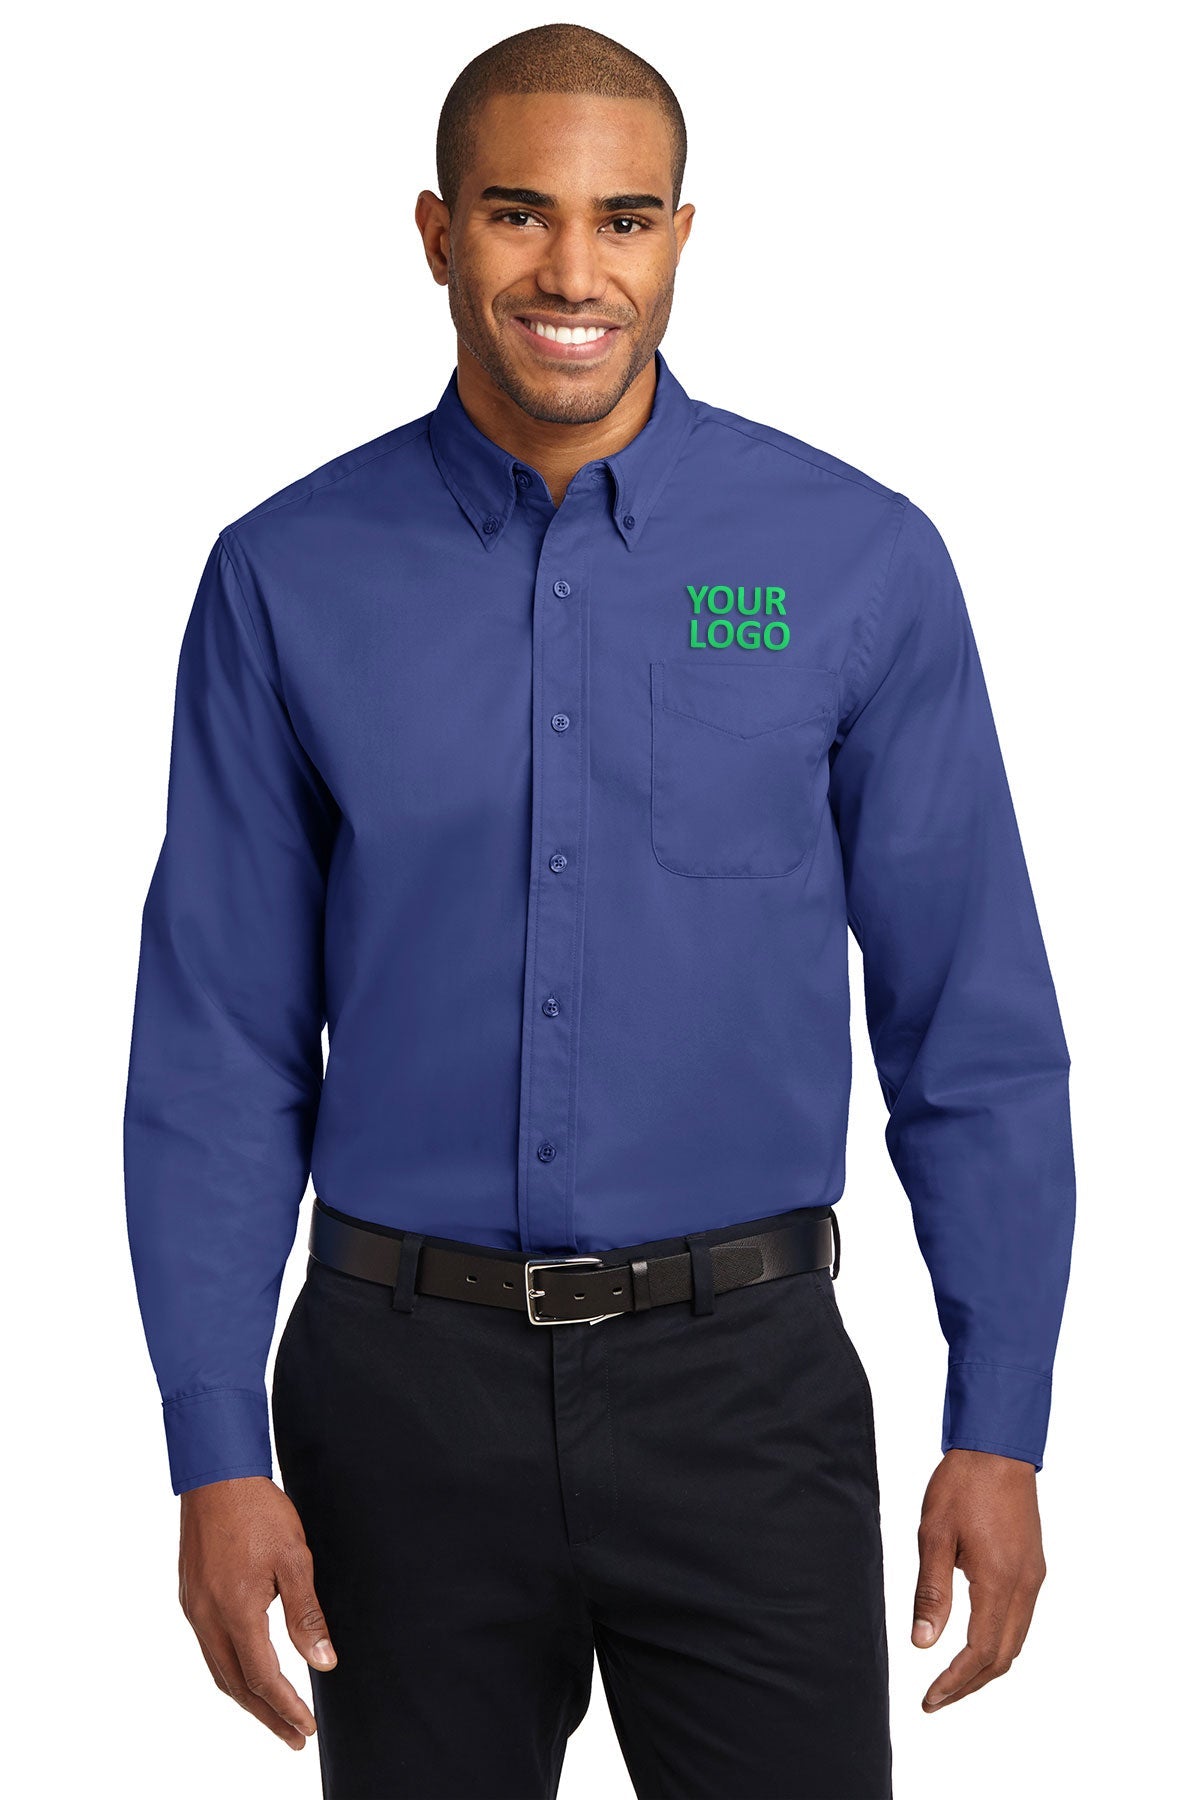 Port Authority Mediterranean Blue S608ES business shirts with company logo